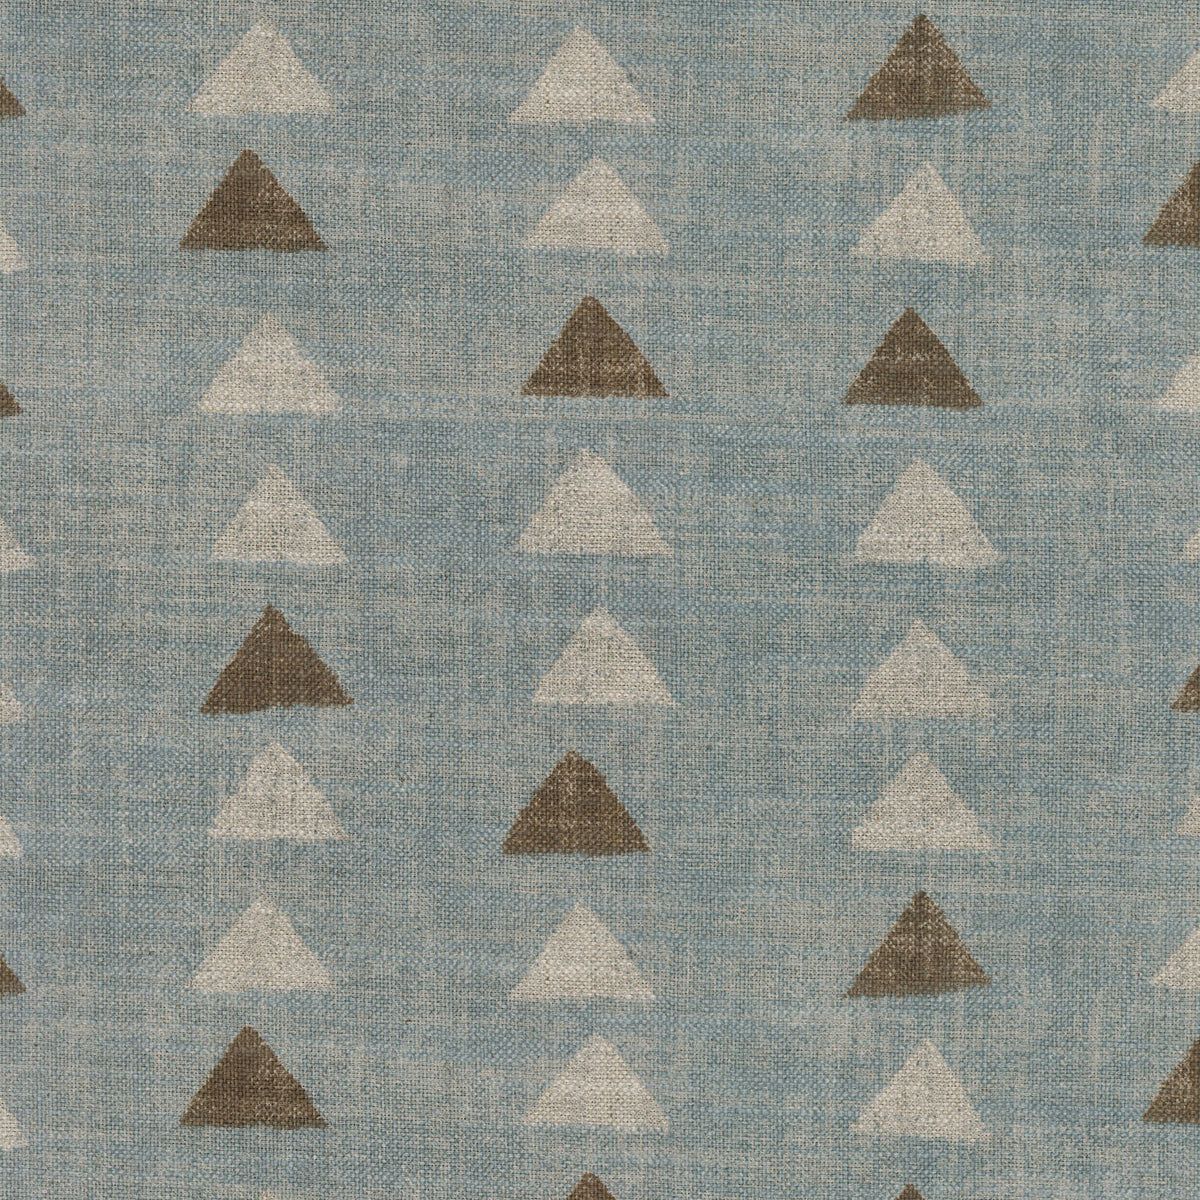 P/K Lifestyles Nomadic Triangle - Seaglass 408453 Upholstery Fabric